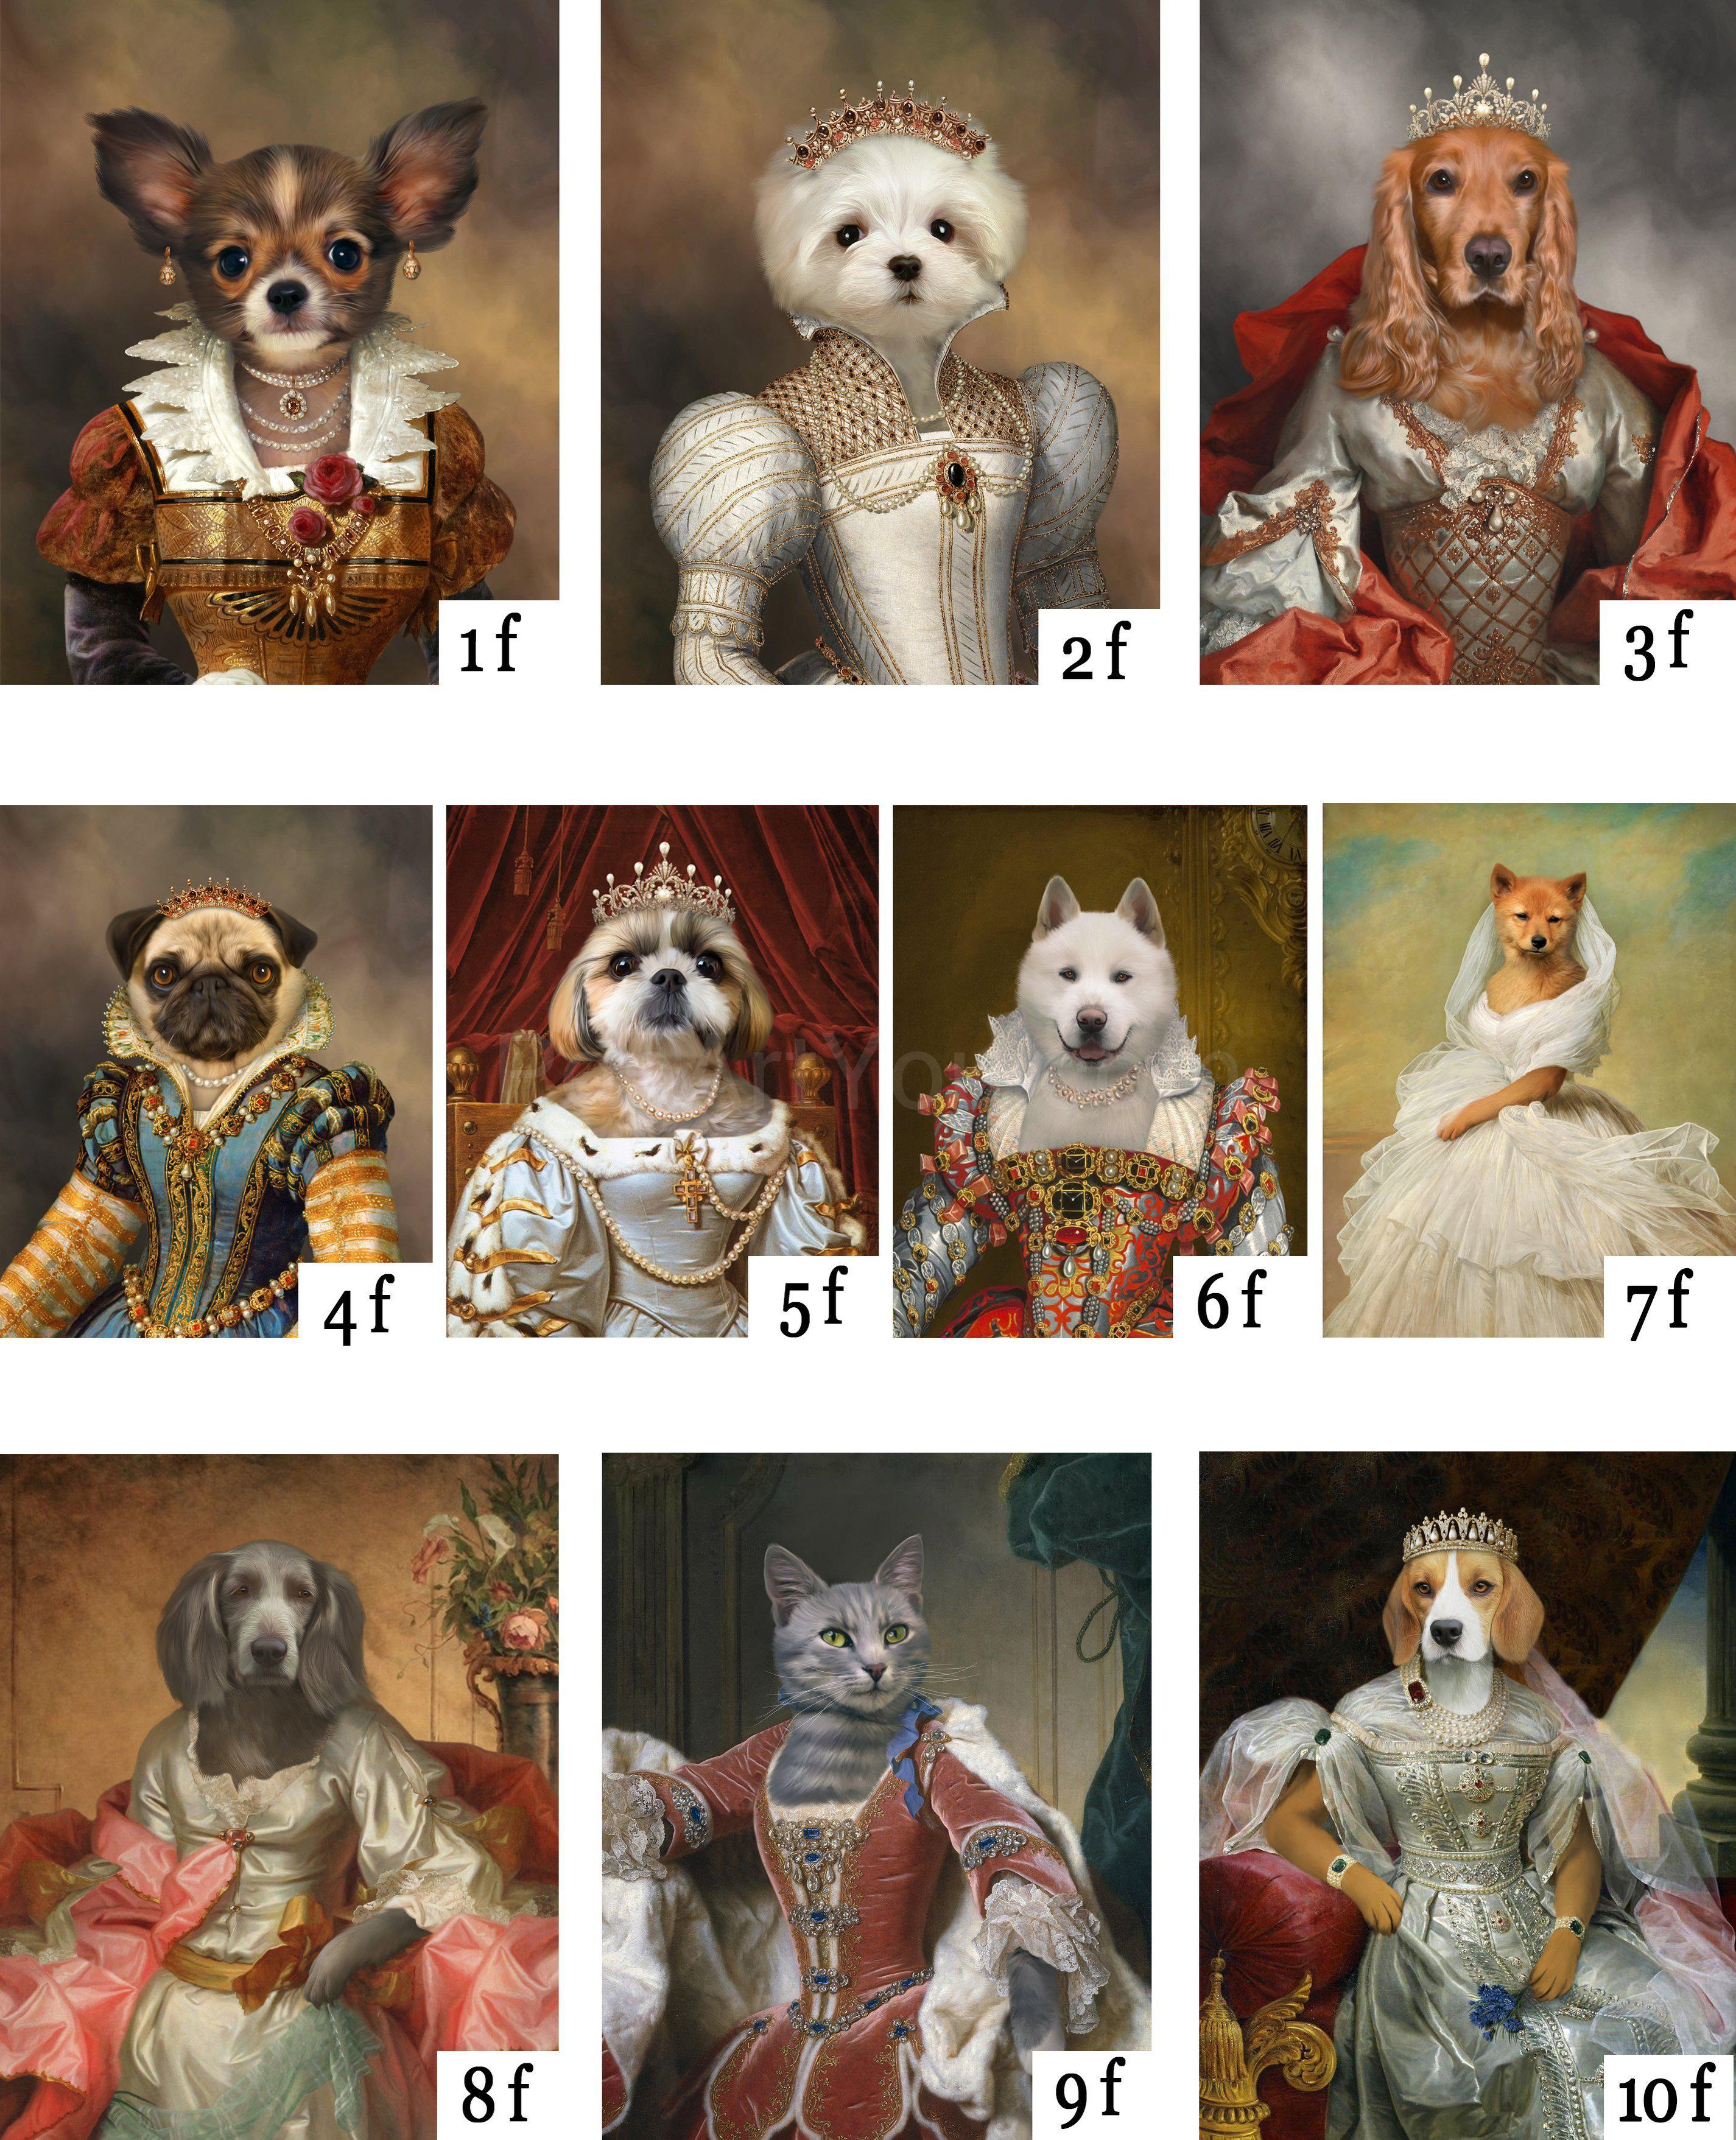 The third of many costume combinations for a two pets portrait